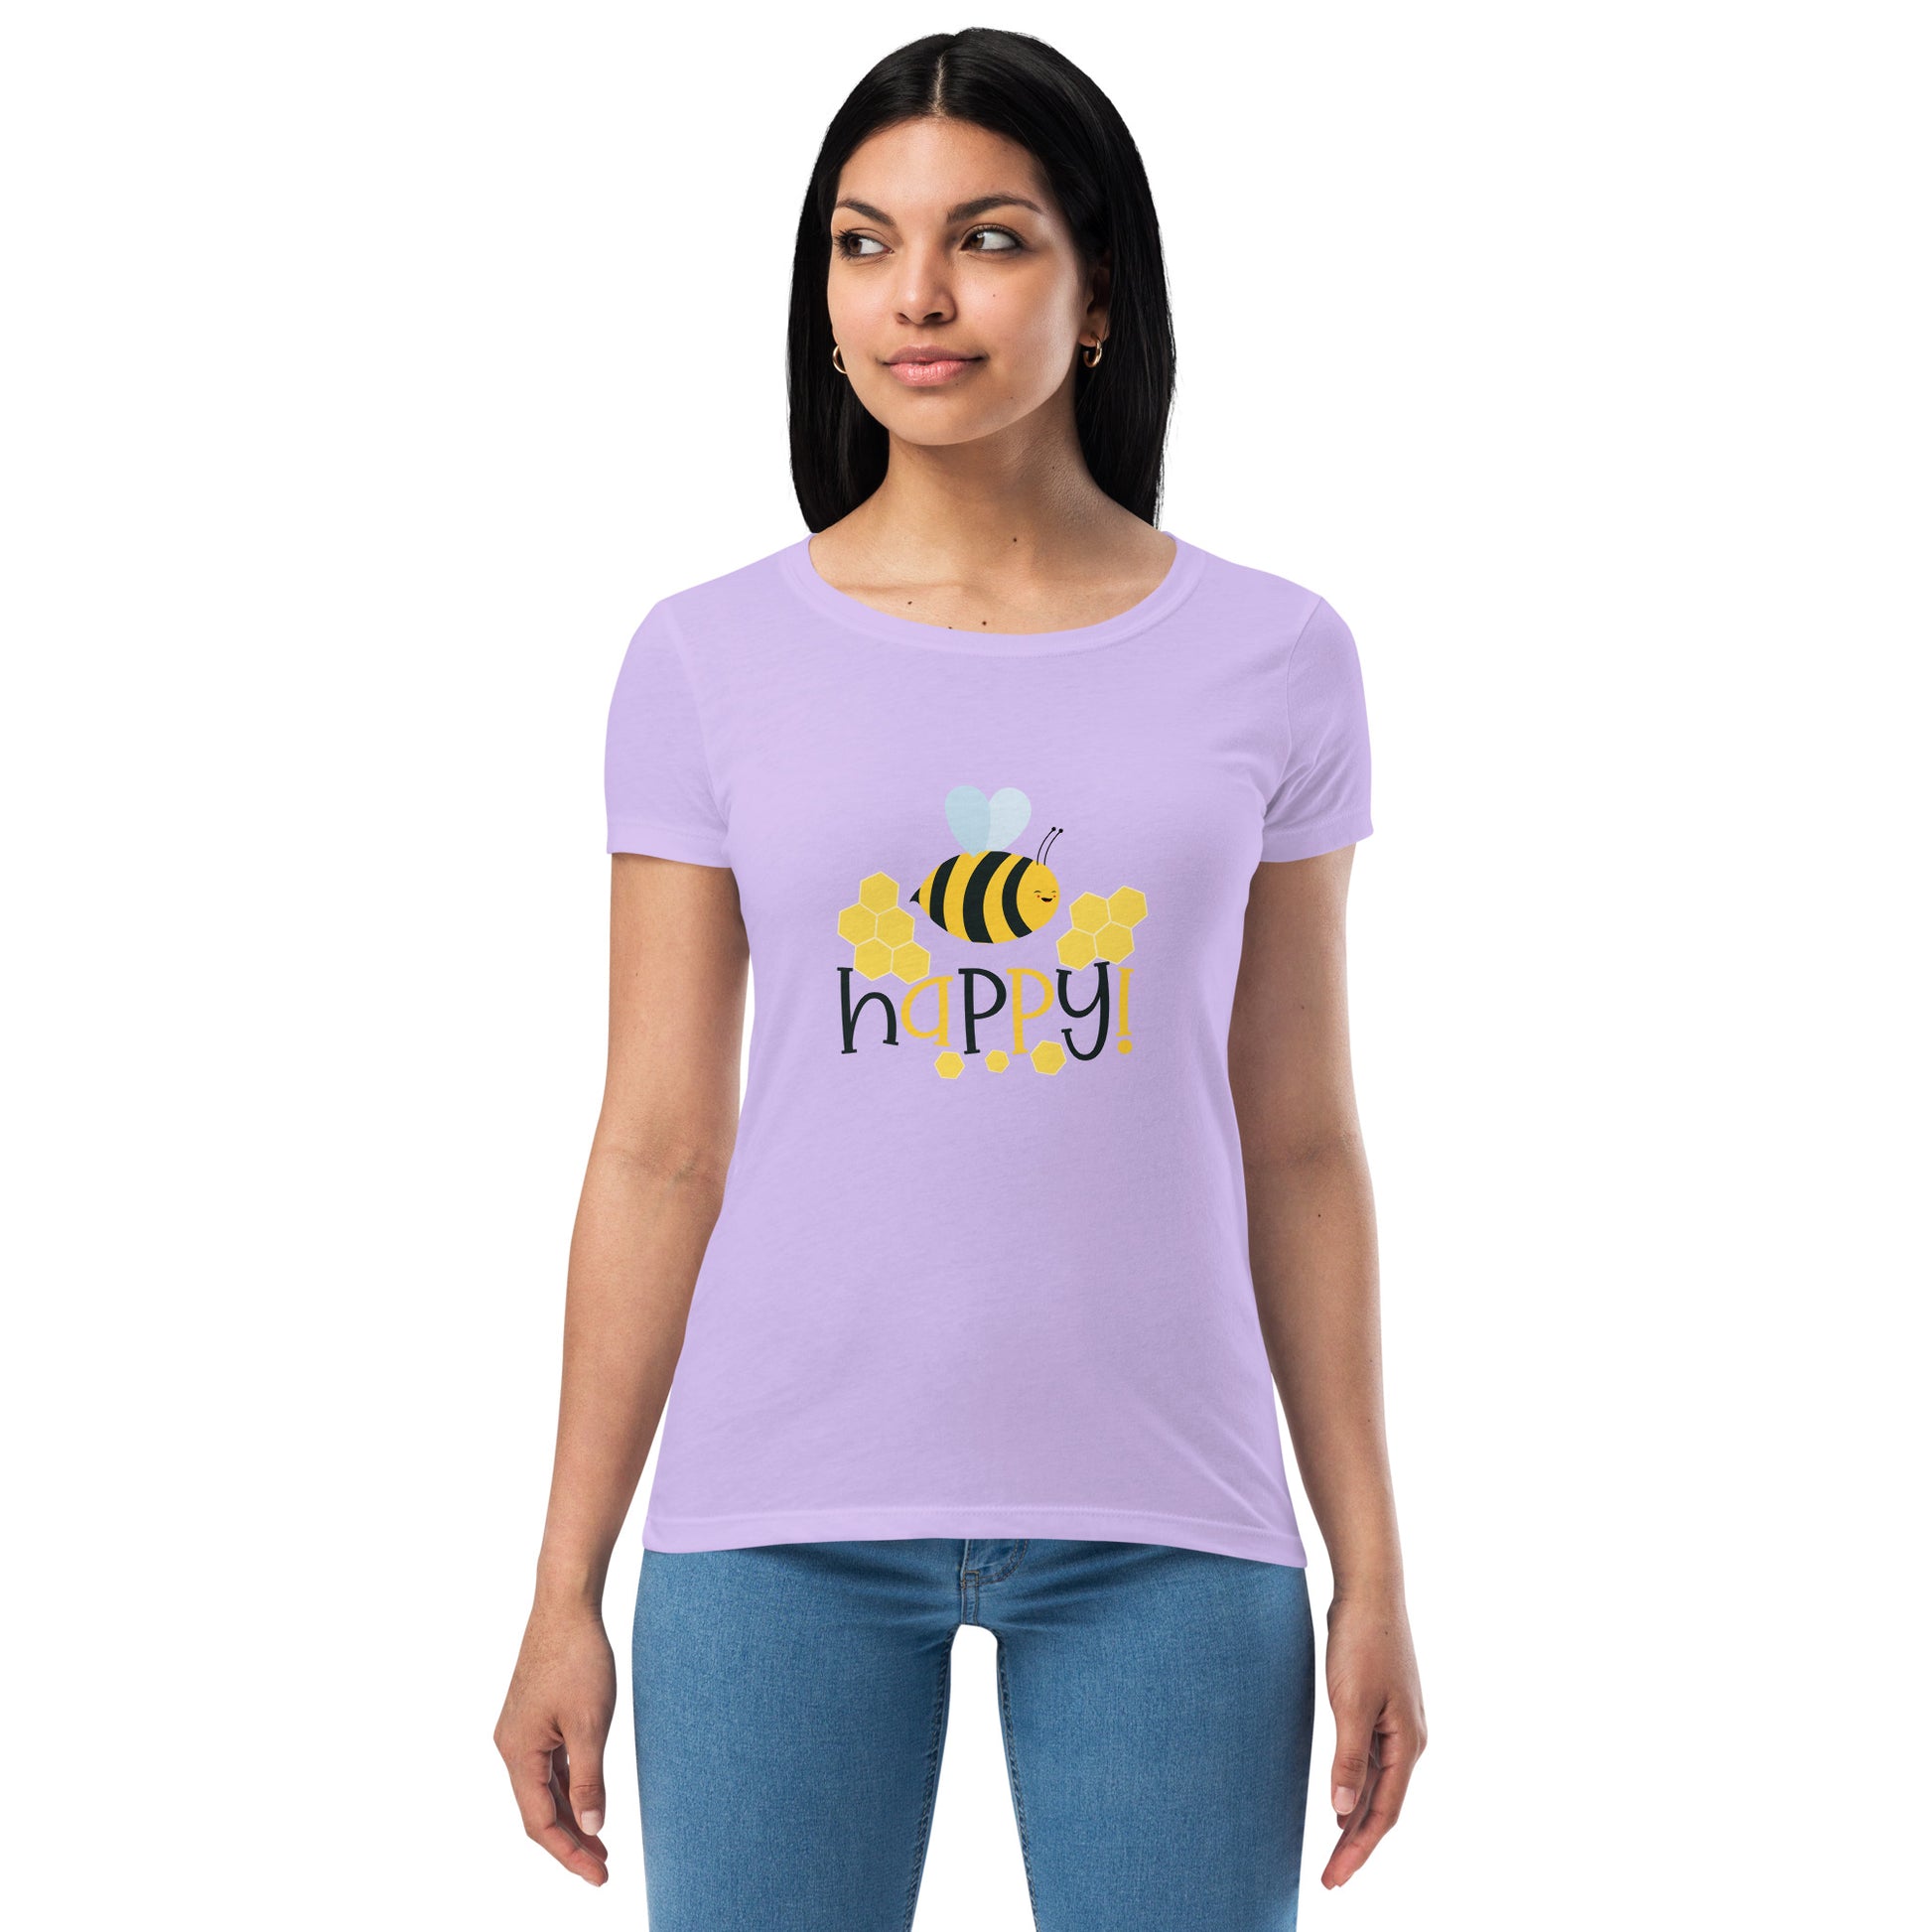 Bee Happy Women’s fitted t-shirt